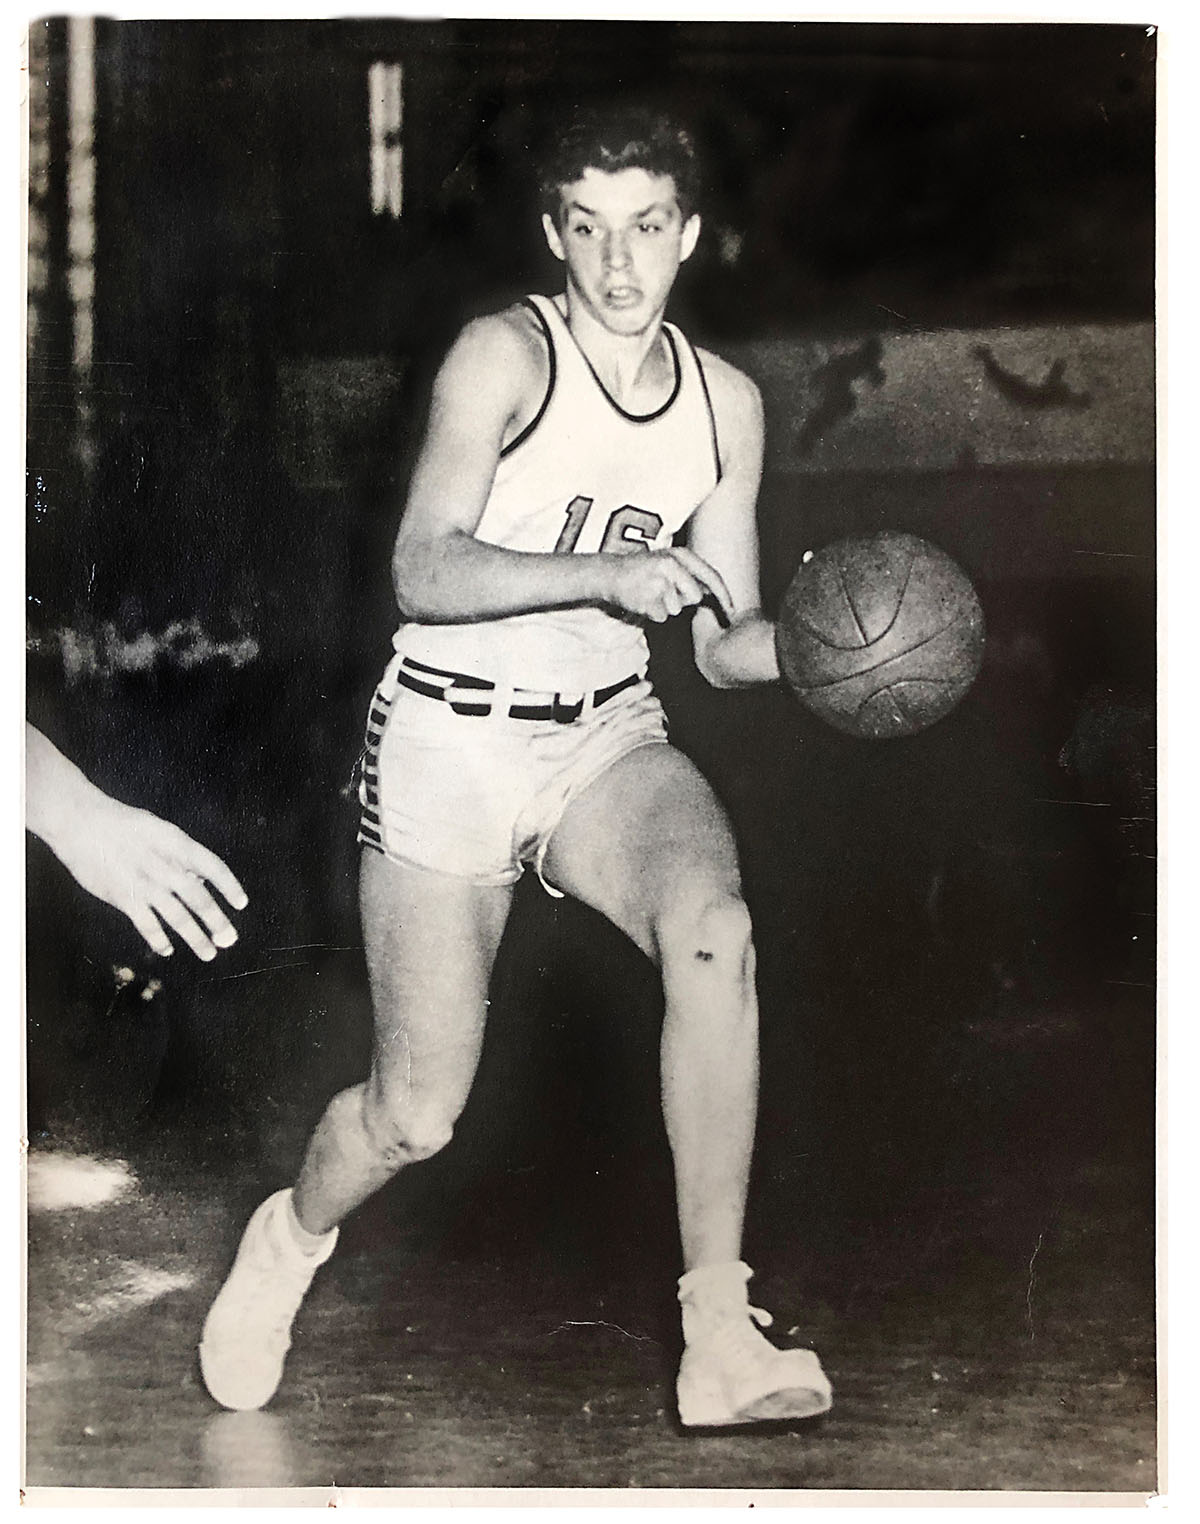 Frankie King, playing for Brooklyn’s Madison High School in 1953. He would mysteriously drop out of UNC without appearing in a single game. (Courtesy of Stephen King)